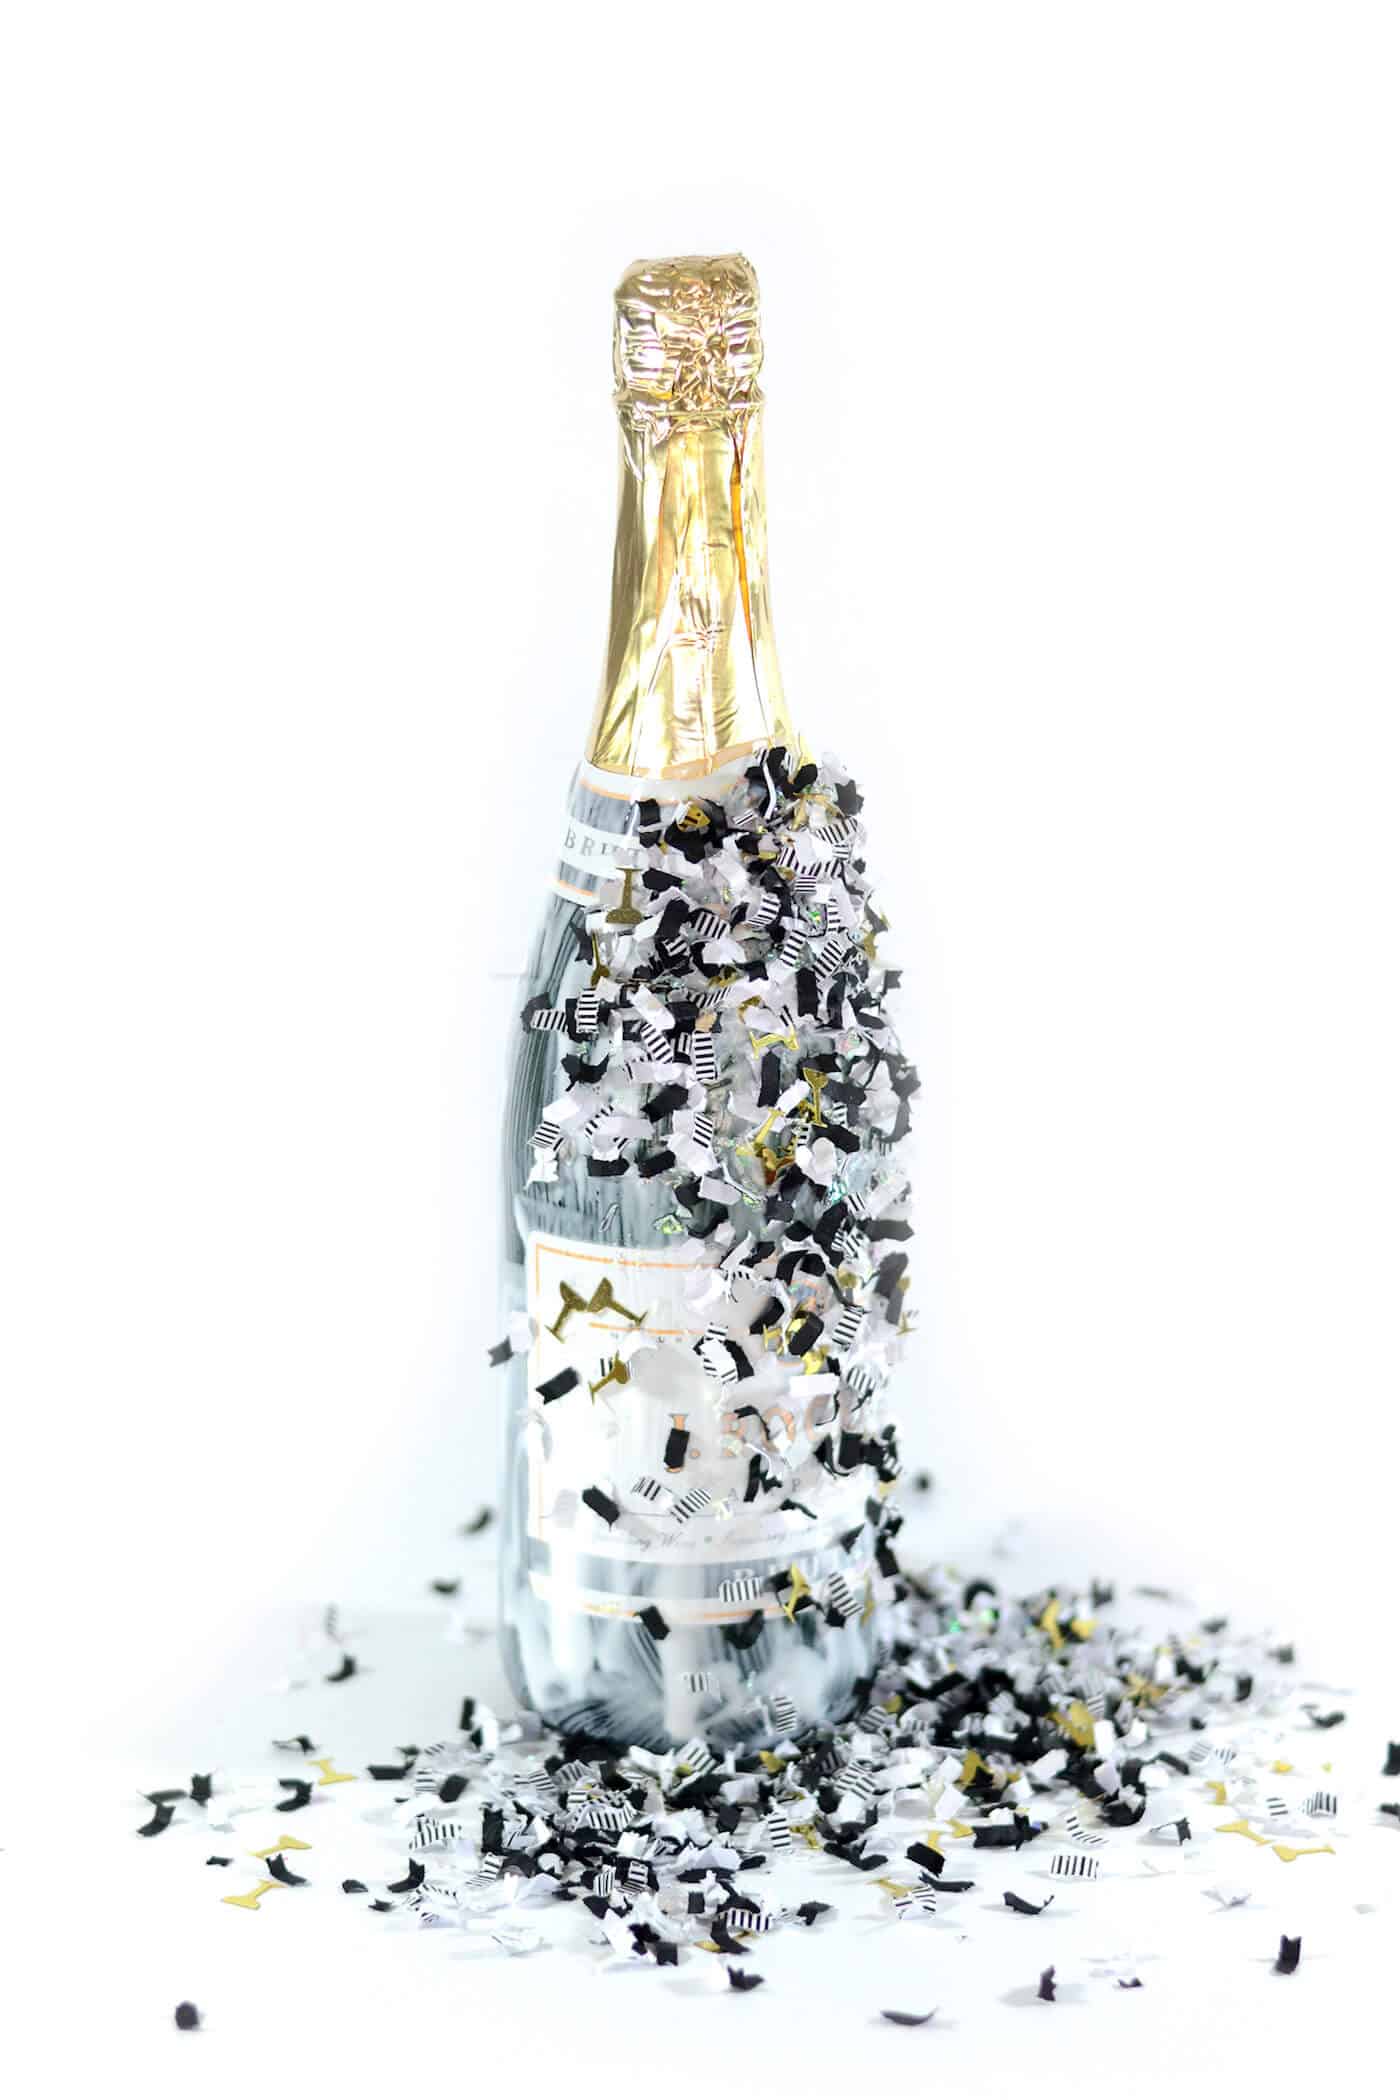 Confetti sprinkled over a bottle covered in Mod Podge